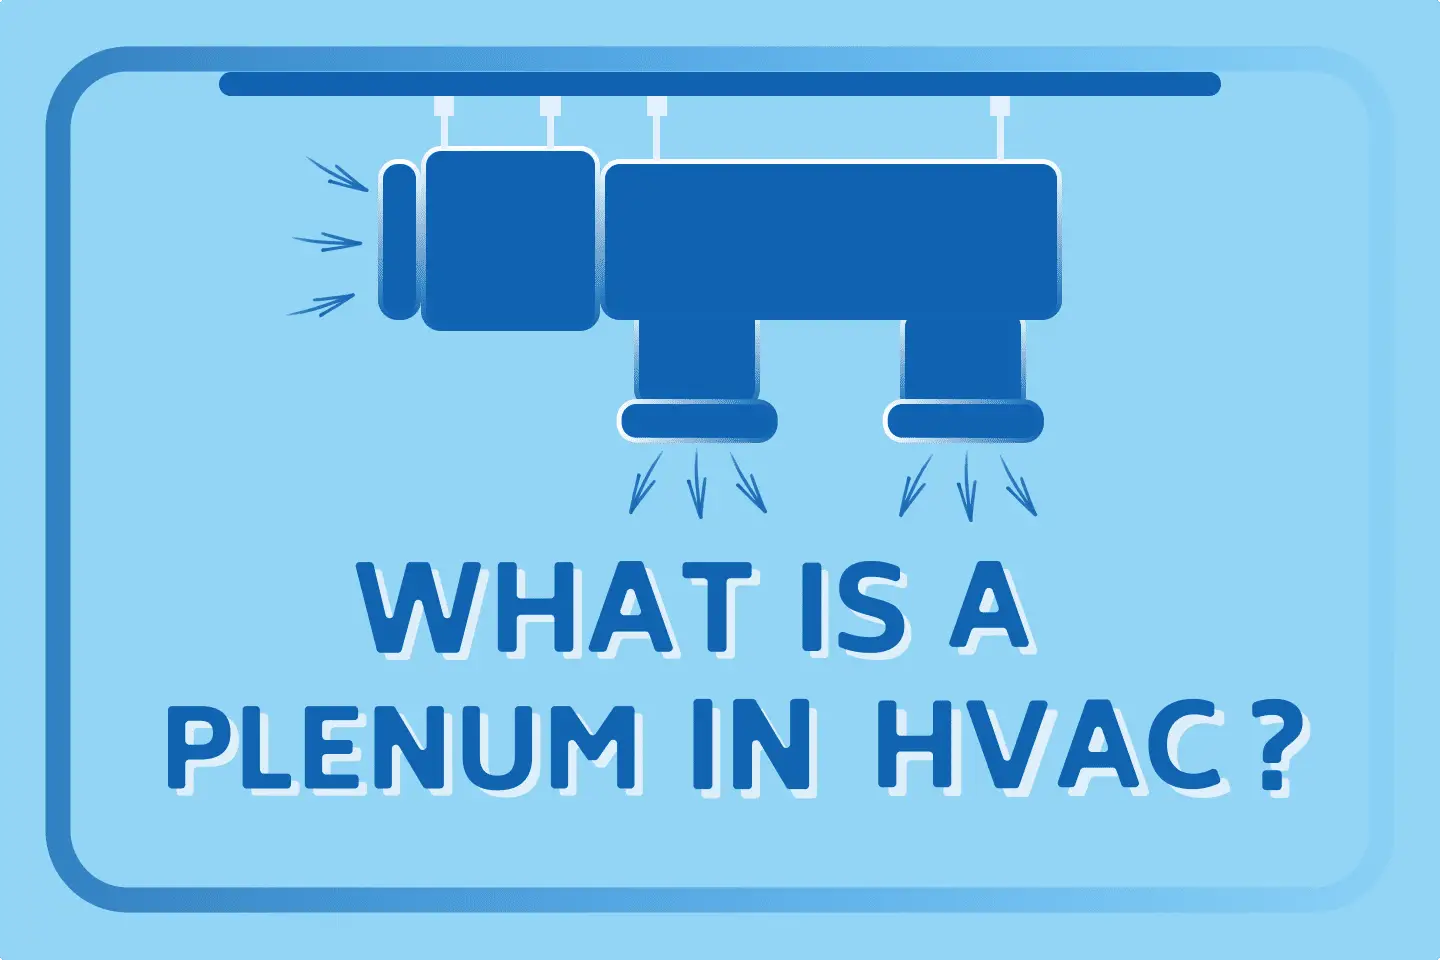 What Is A Plenum In HVAC System?